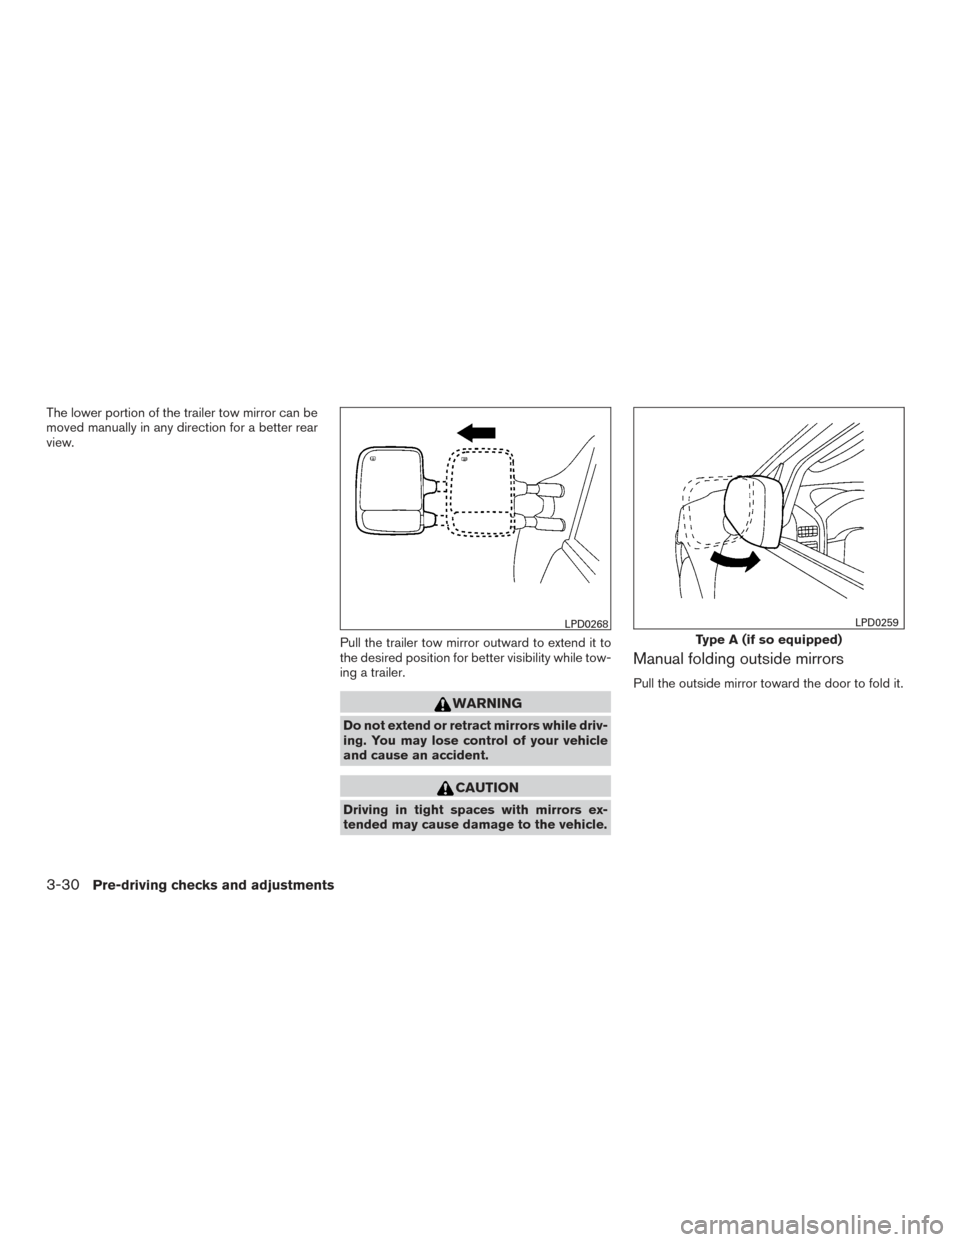 NISSAN TITAN 2016 2.G Owners Manual The lower portion of the trailer tow mirror can be
moved manually in any direction for a better rear
view.Pull the trailer tow mirror outward to extend it to
the desired position for better visibility